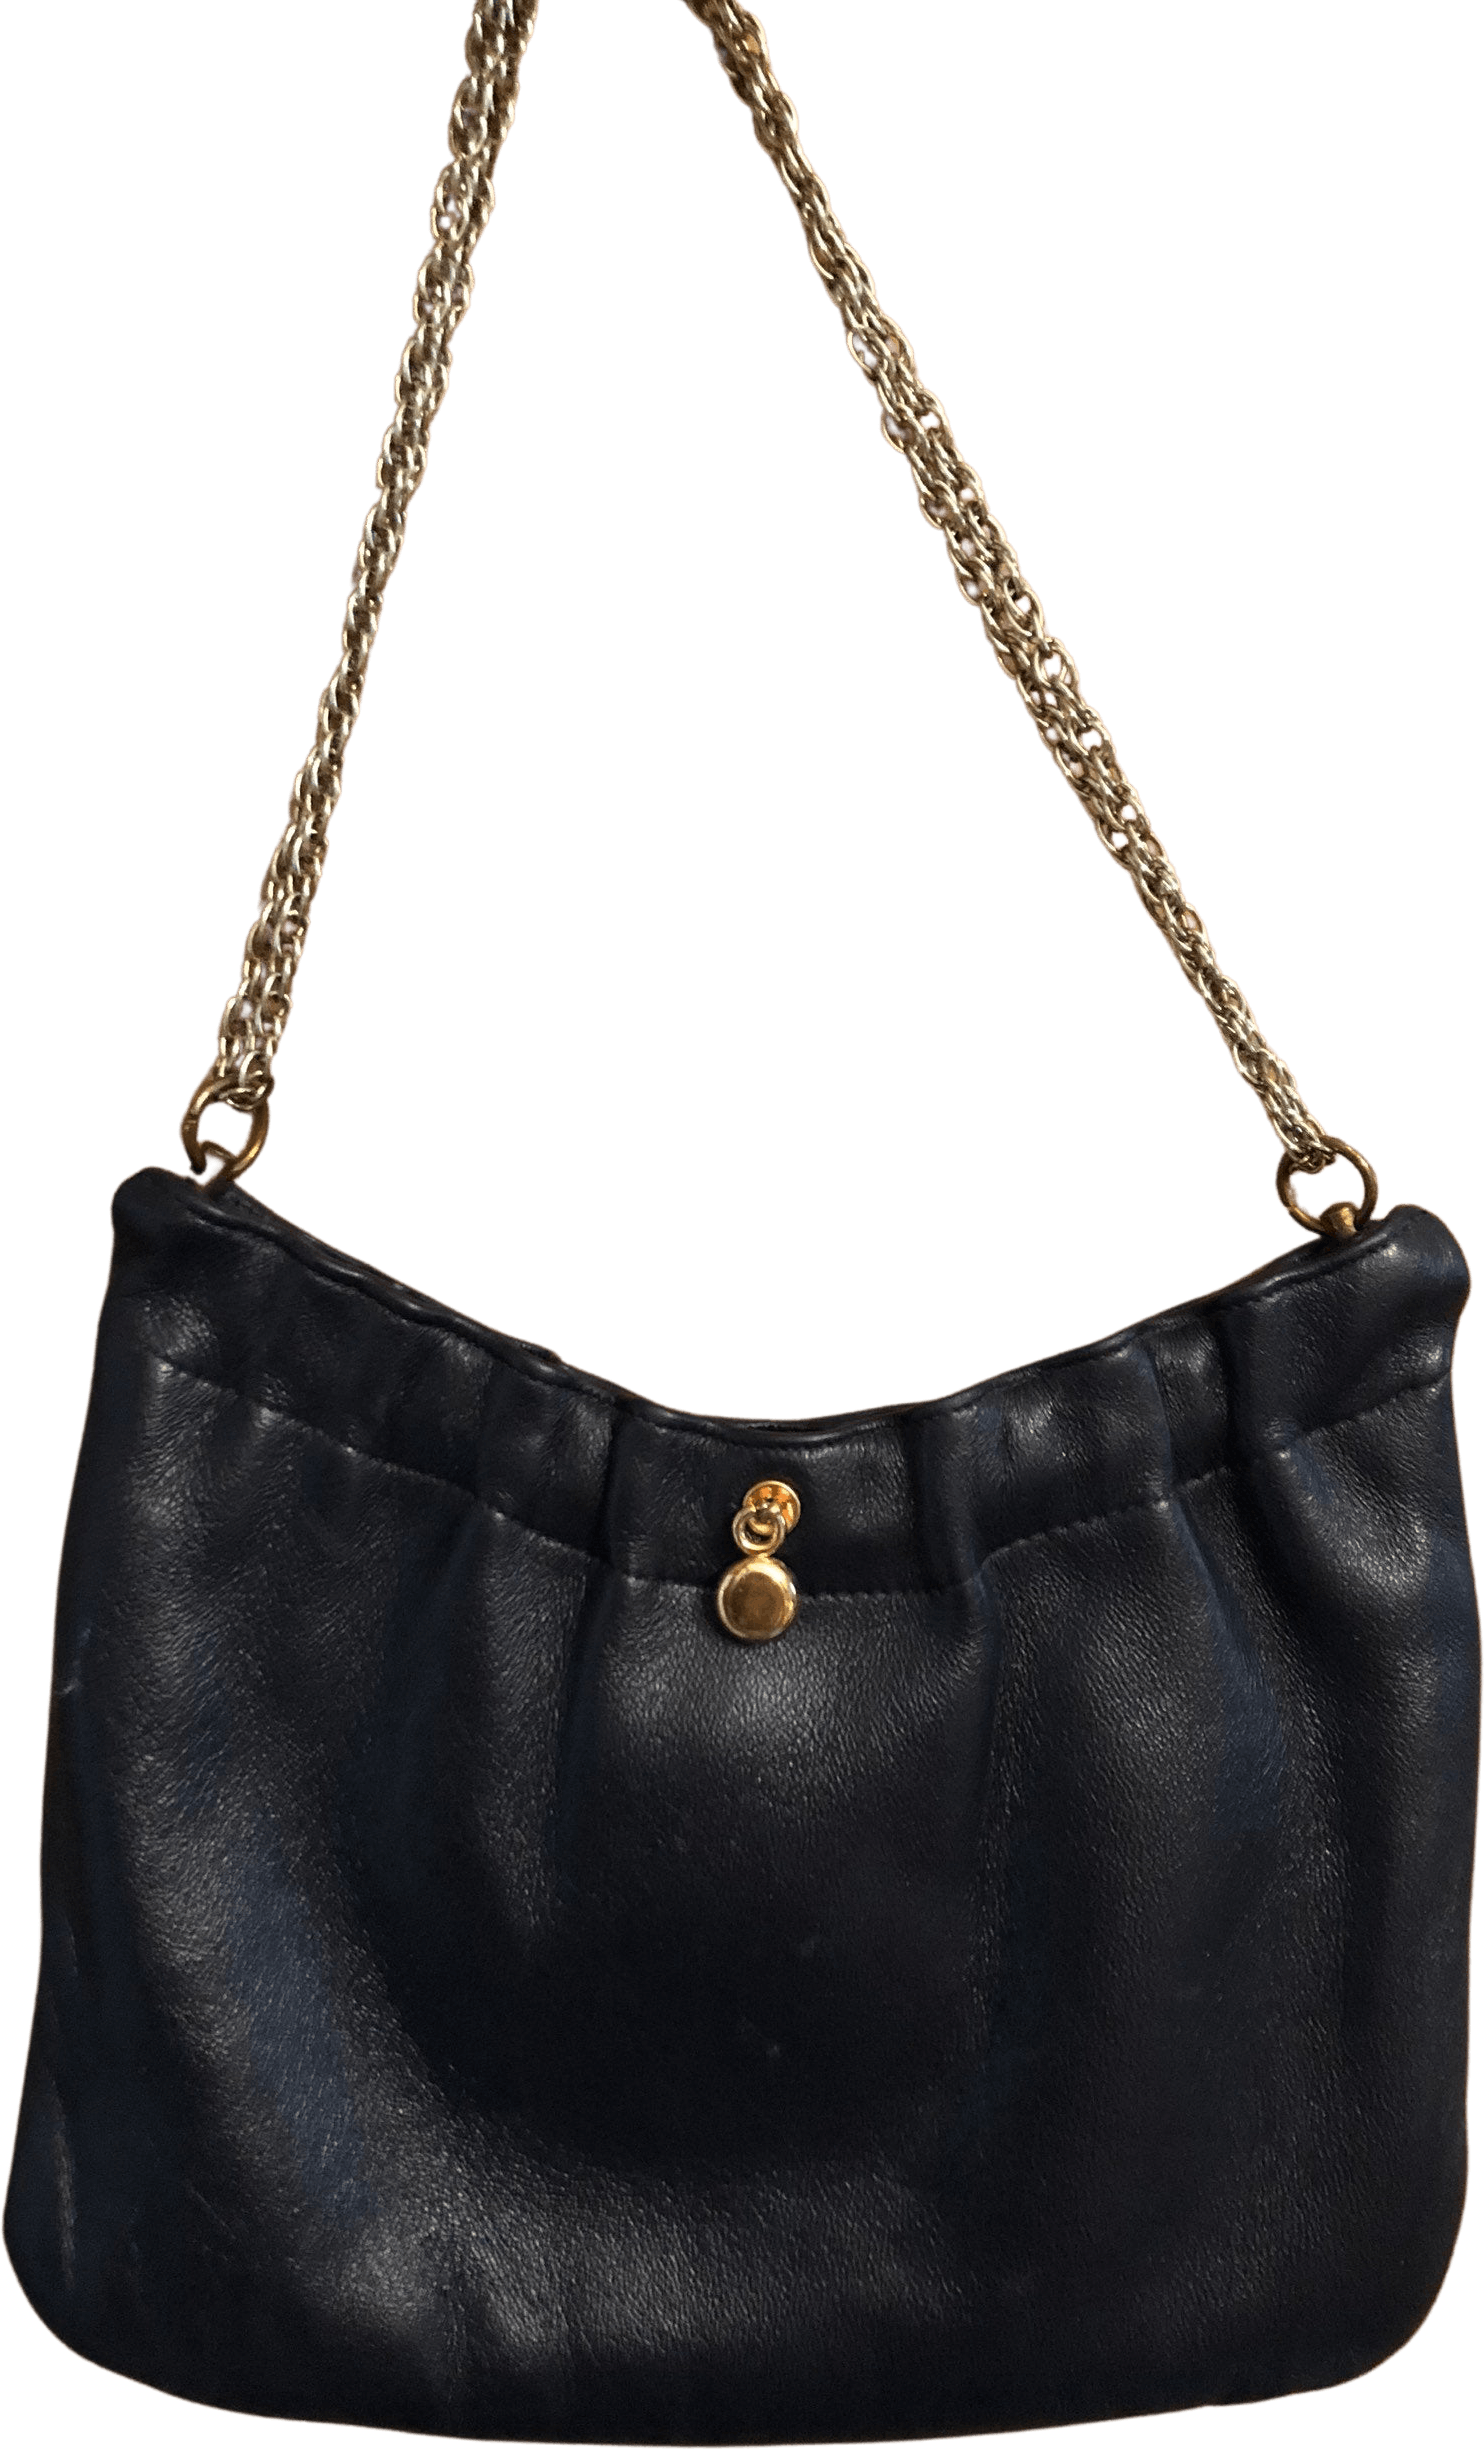 Black Leather Bag Background PNG Image | PNG Play